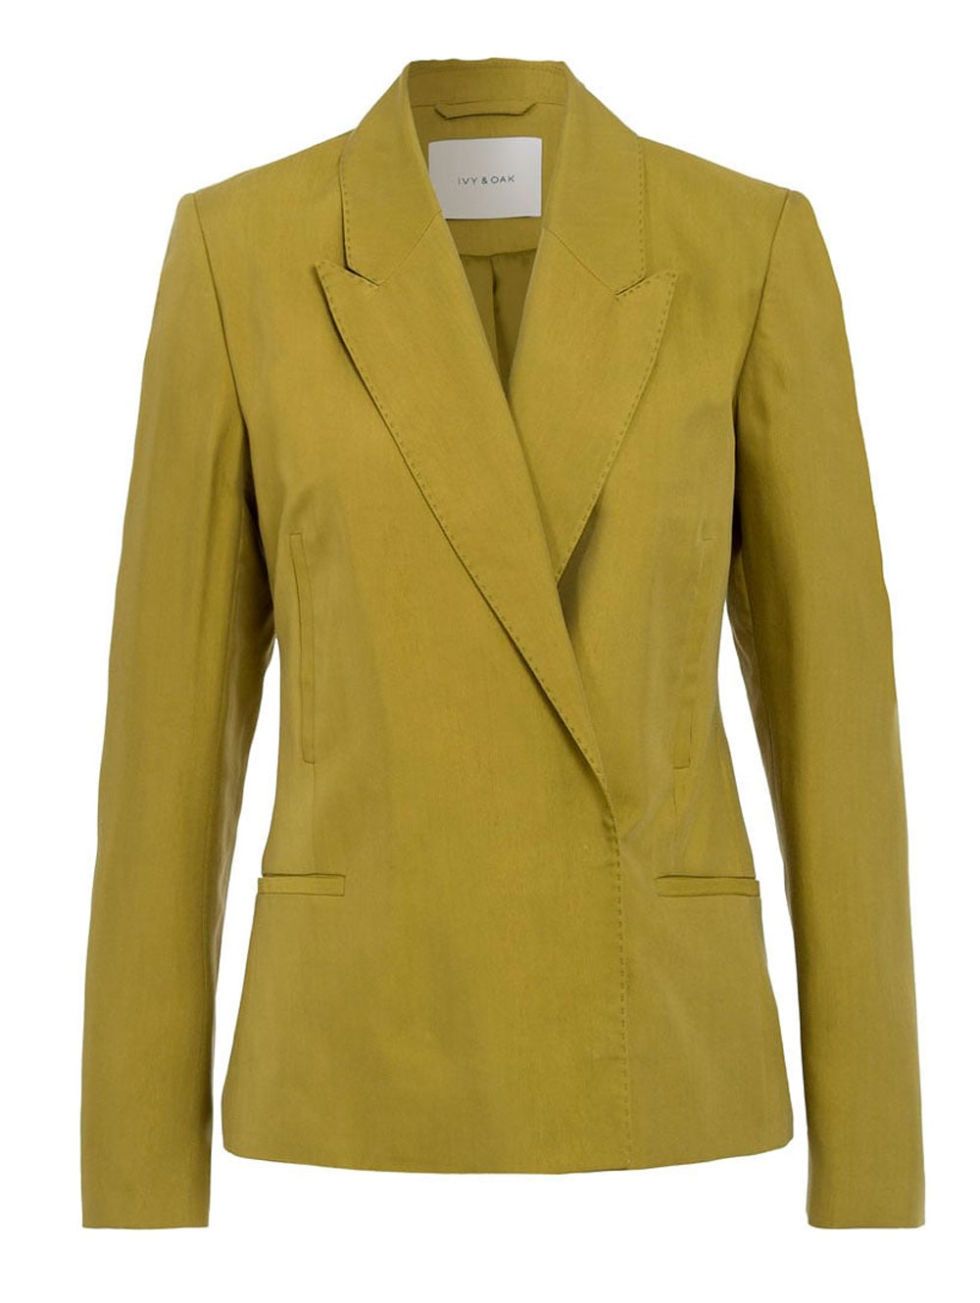 Clothing, Outerwear, Jacket, Blazer, Yellow, Sleeve, Suit, Top, Button, Beige, 